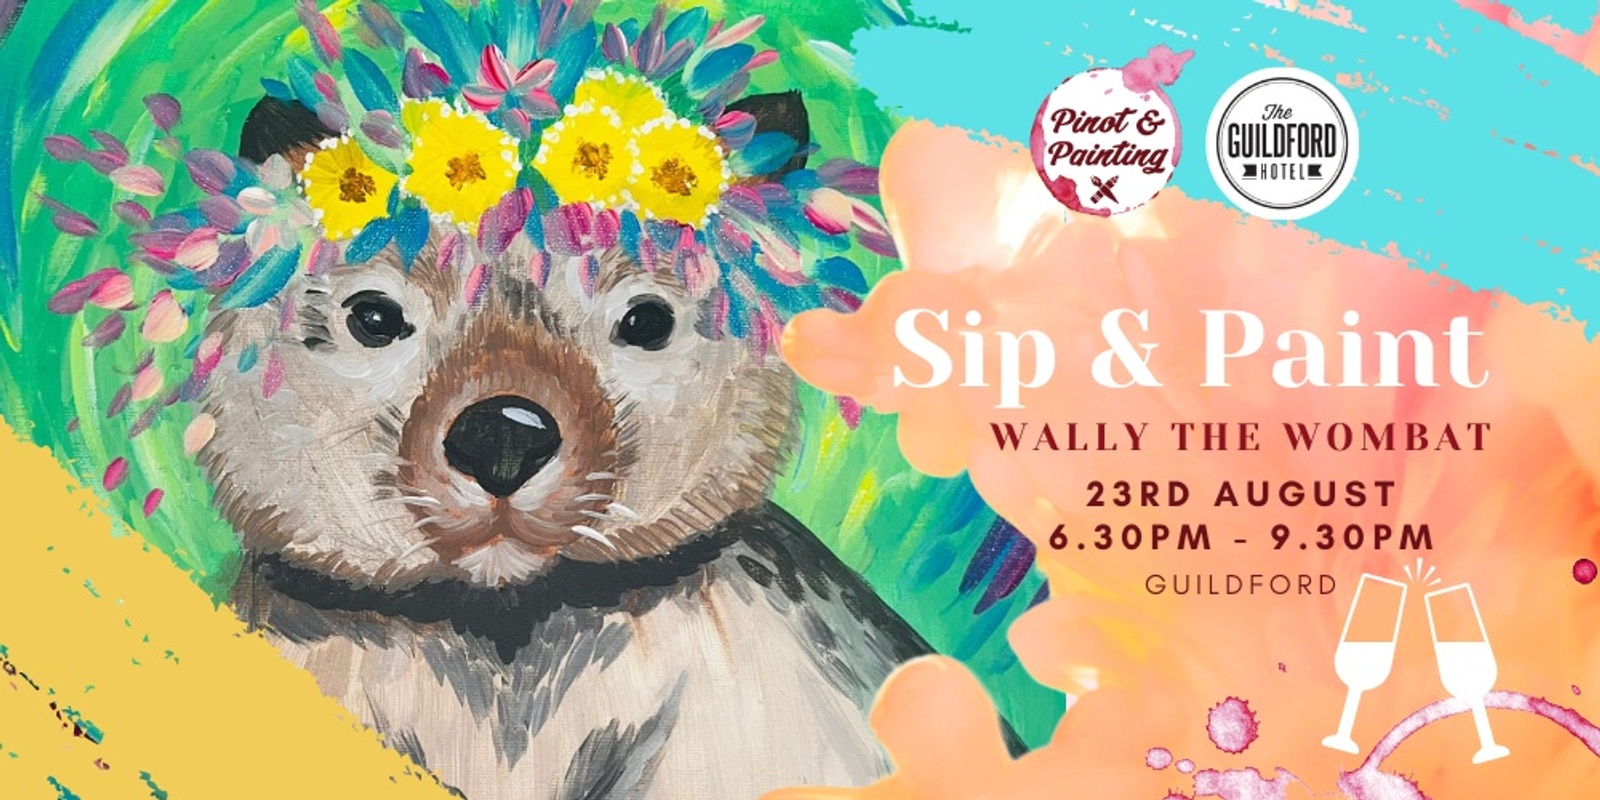 Banner image for Wally the Wombat - Sip & Paint @ The Guildford Hotel